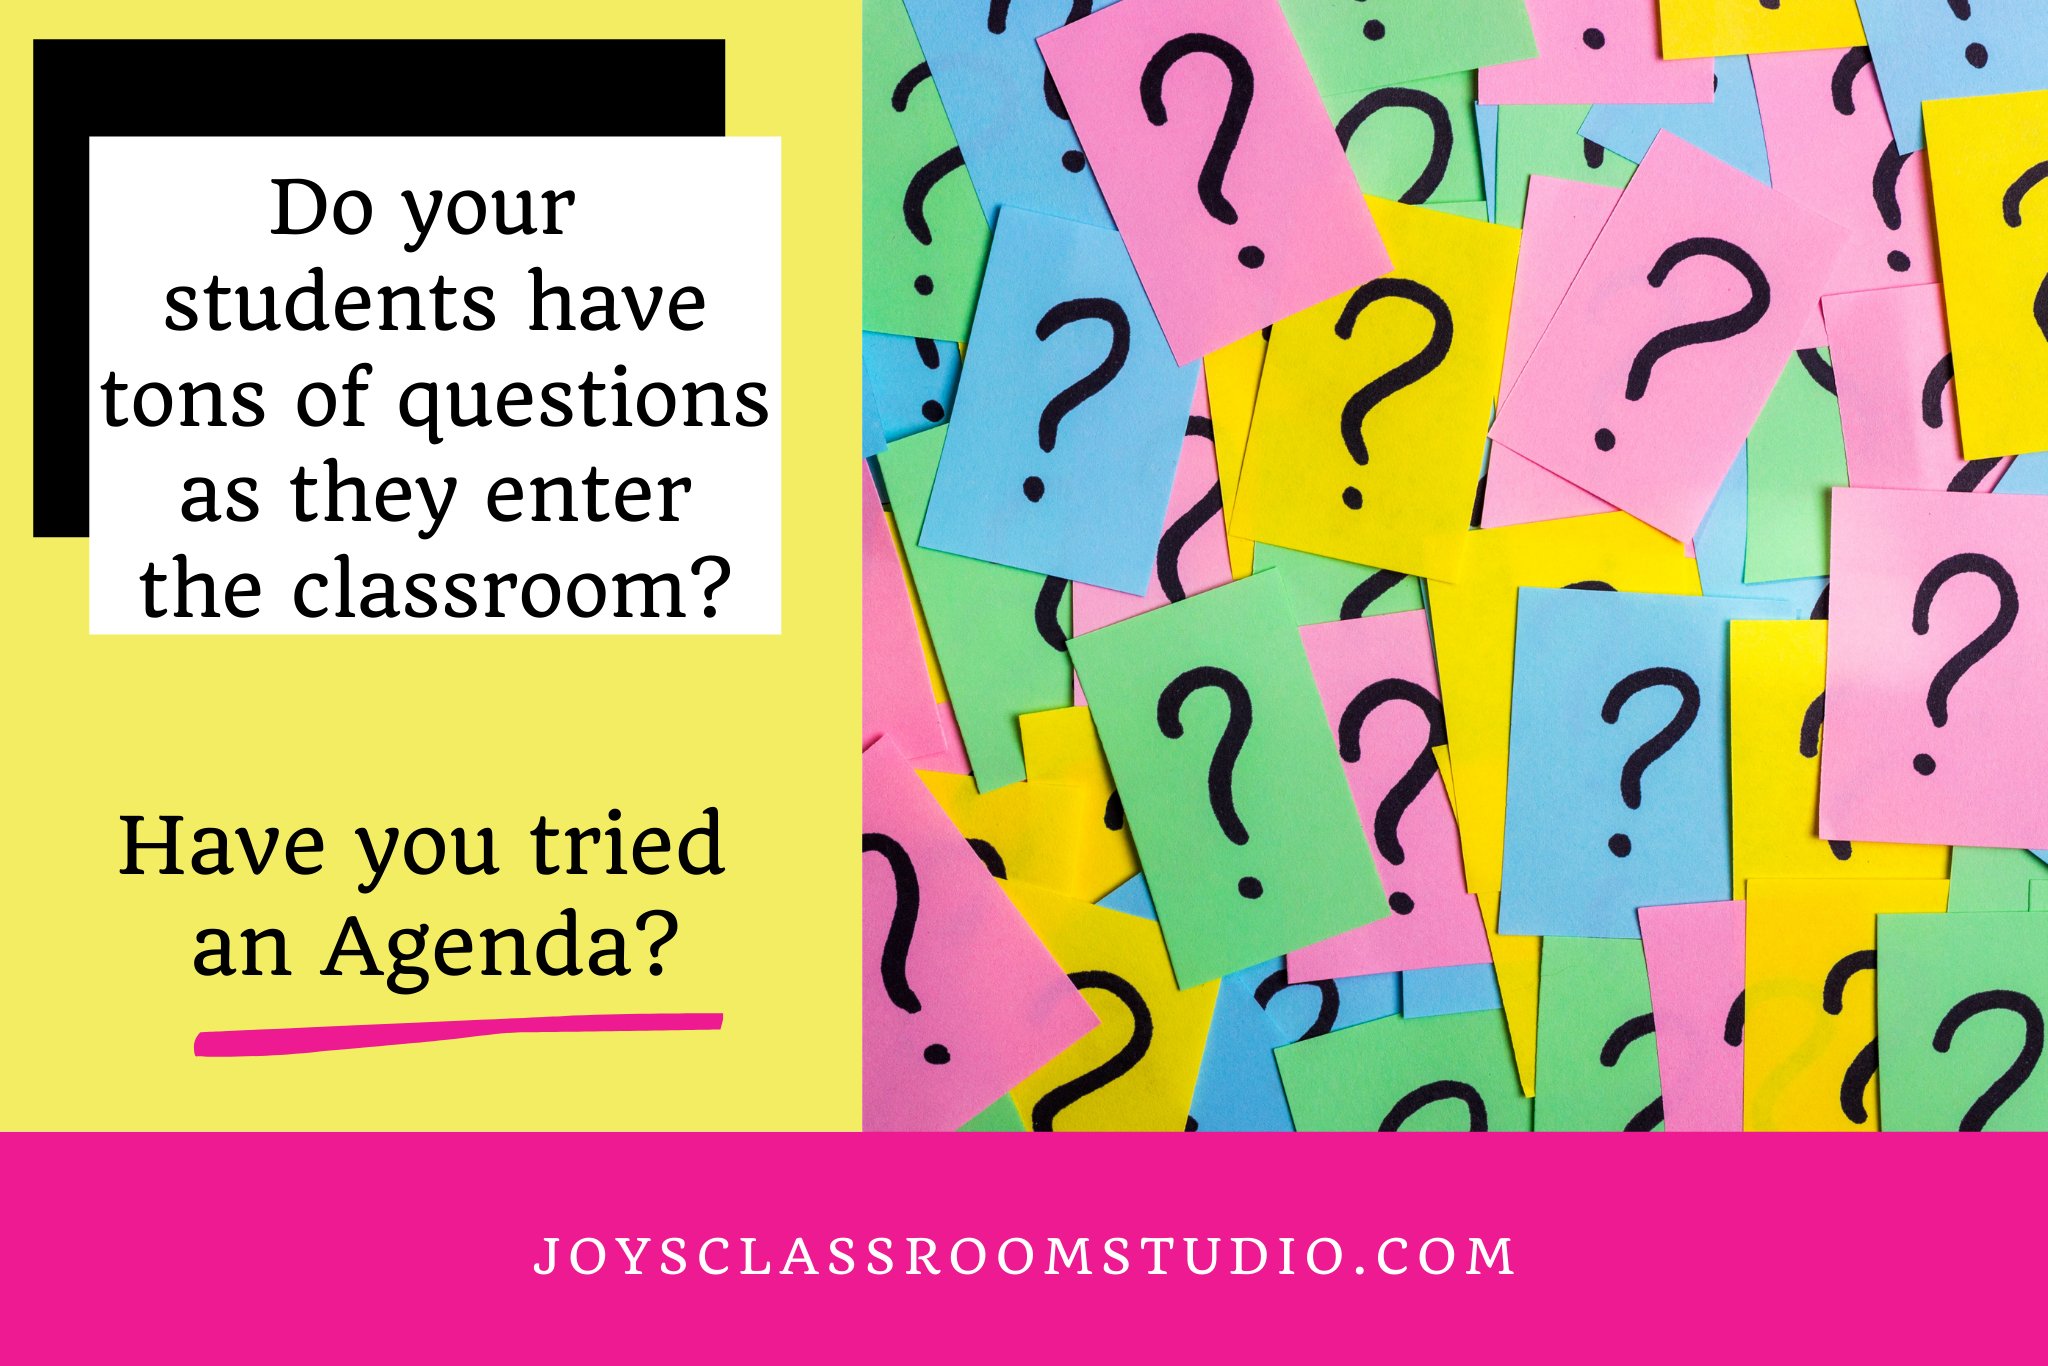 Do your students have tons of questions as they enter the classroom?